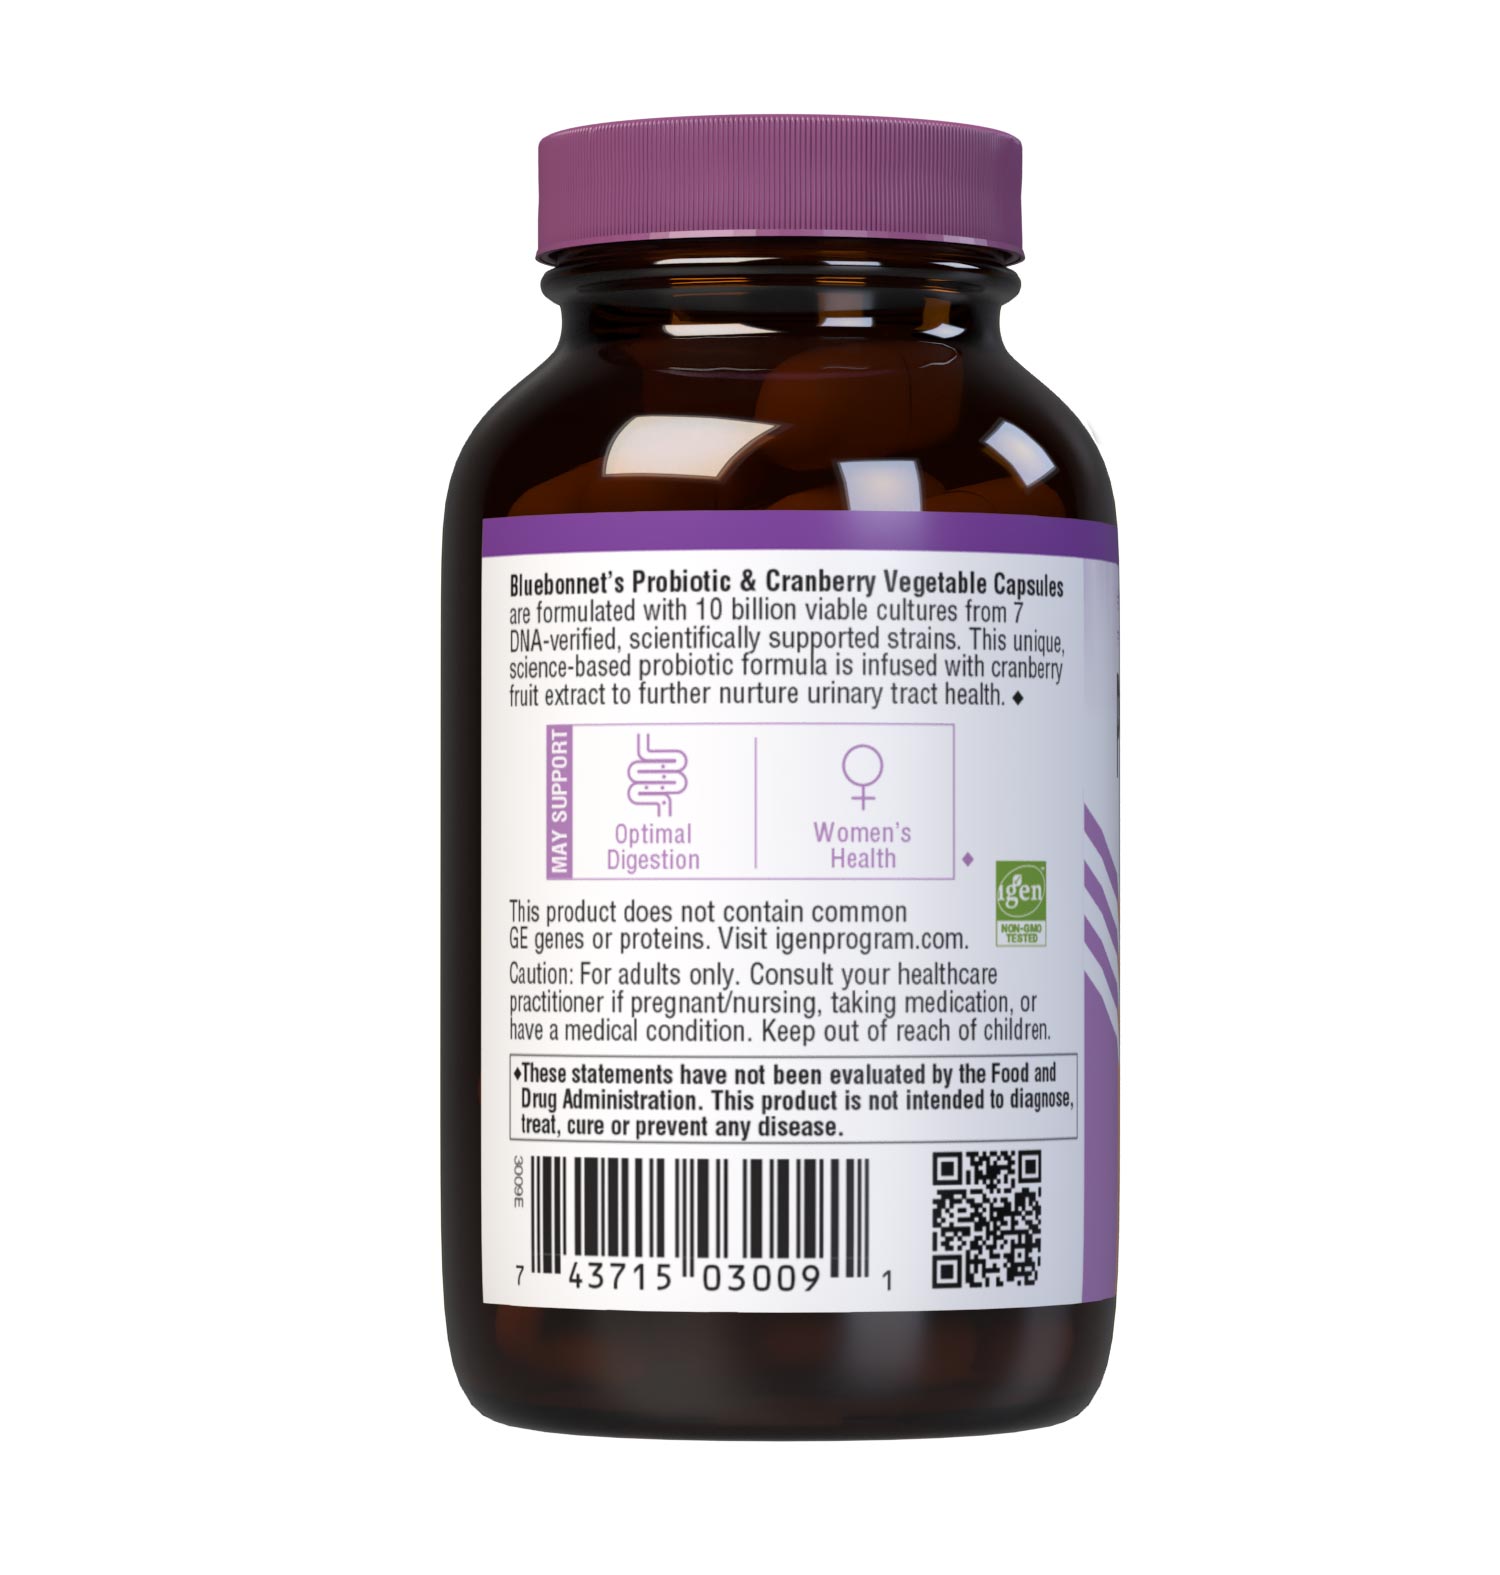 Bluebonnet’s Ladies' Probiotic & Cranberry 30 Vegetable Capsules are formulated with 10 billion viable cultures from 7 DNA-verified, scientifically supported strains. This unique, science-based probiotic formula is infused with cranberry fruit extract to further nurture urinary tract health. Description panel. #size_30 count